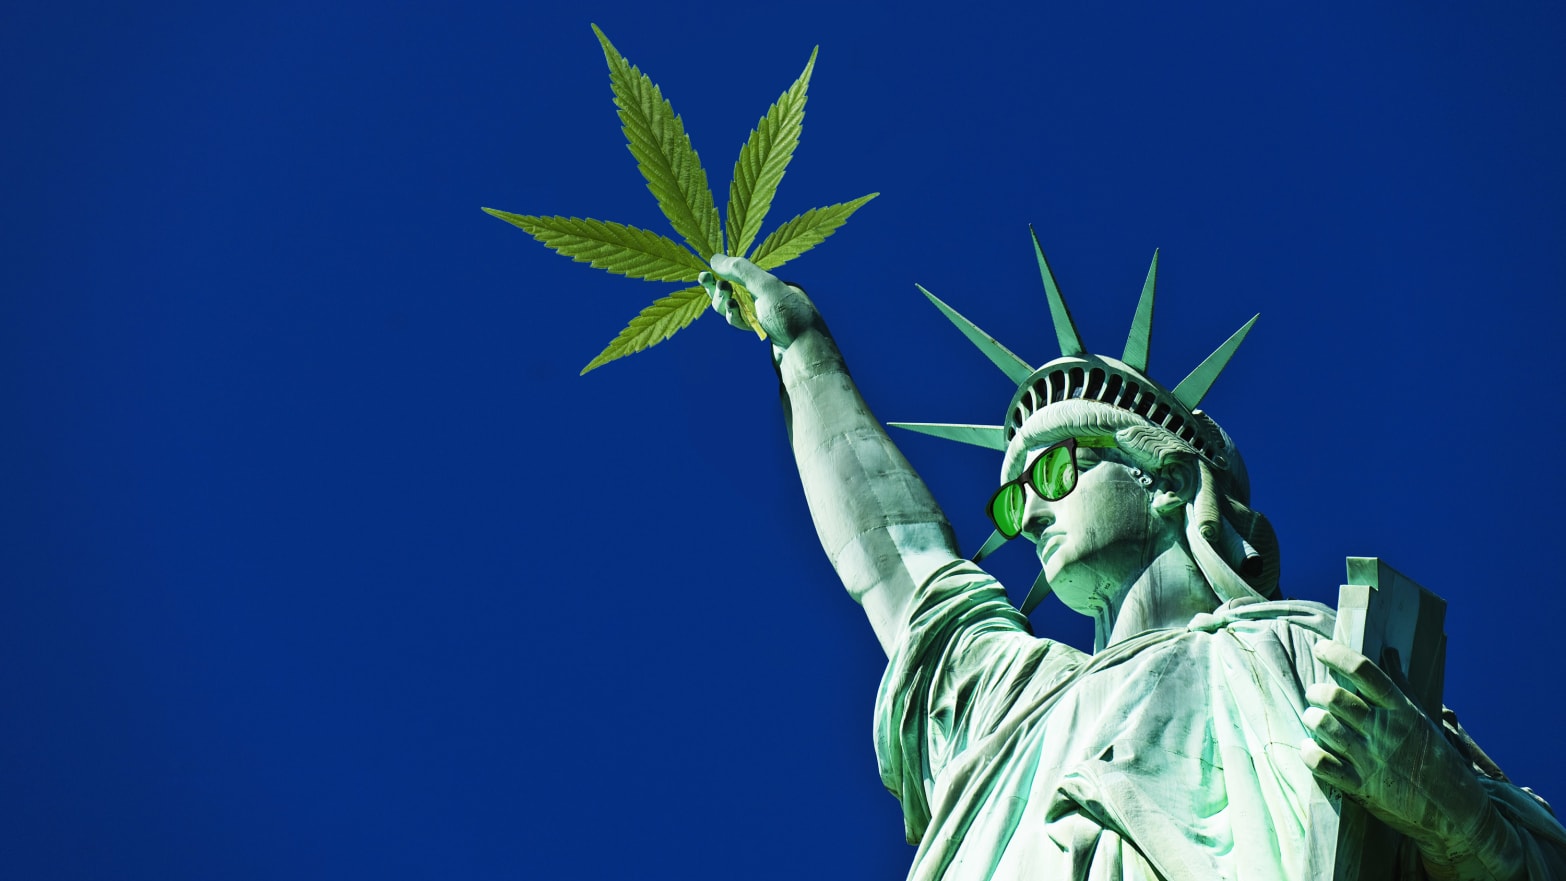 NY’s Proposed Adult-Use Weed Bill Could Create 60k Jobs and Bring in $300 Million